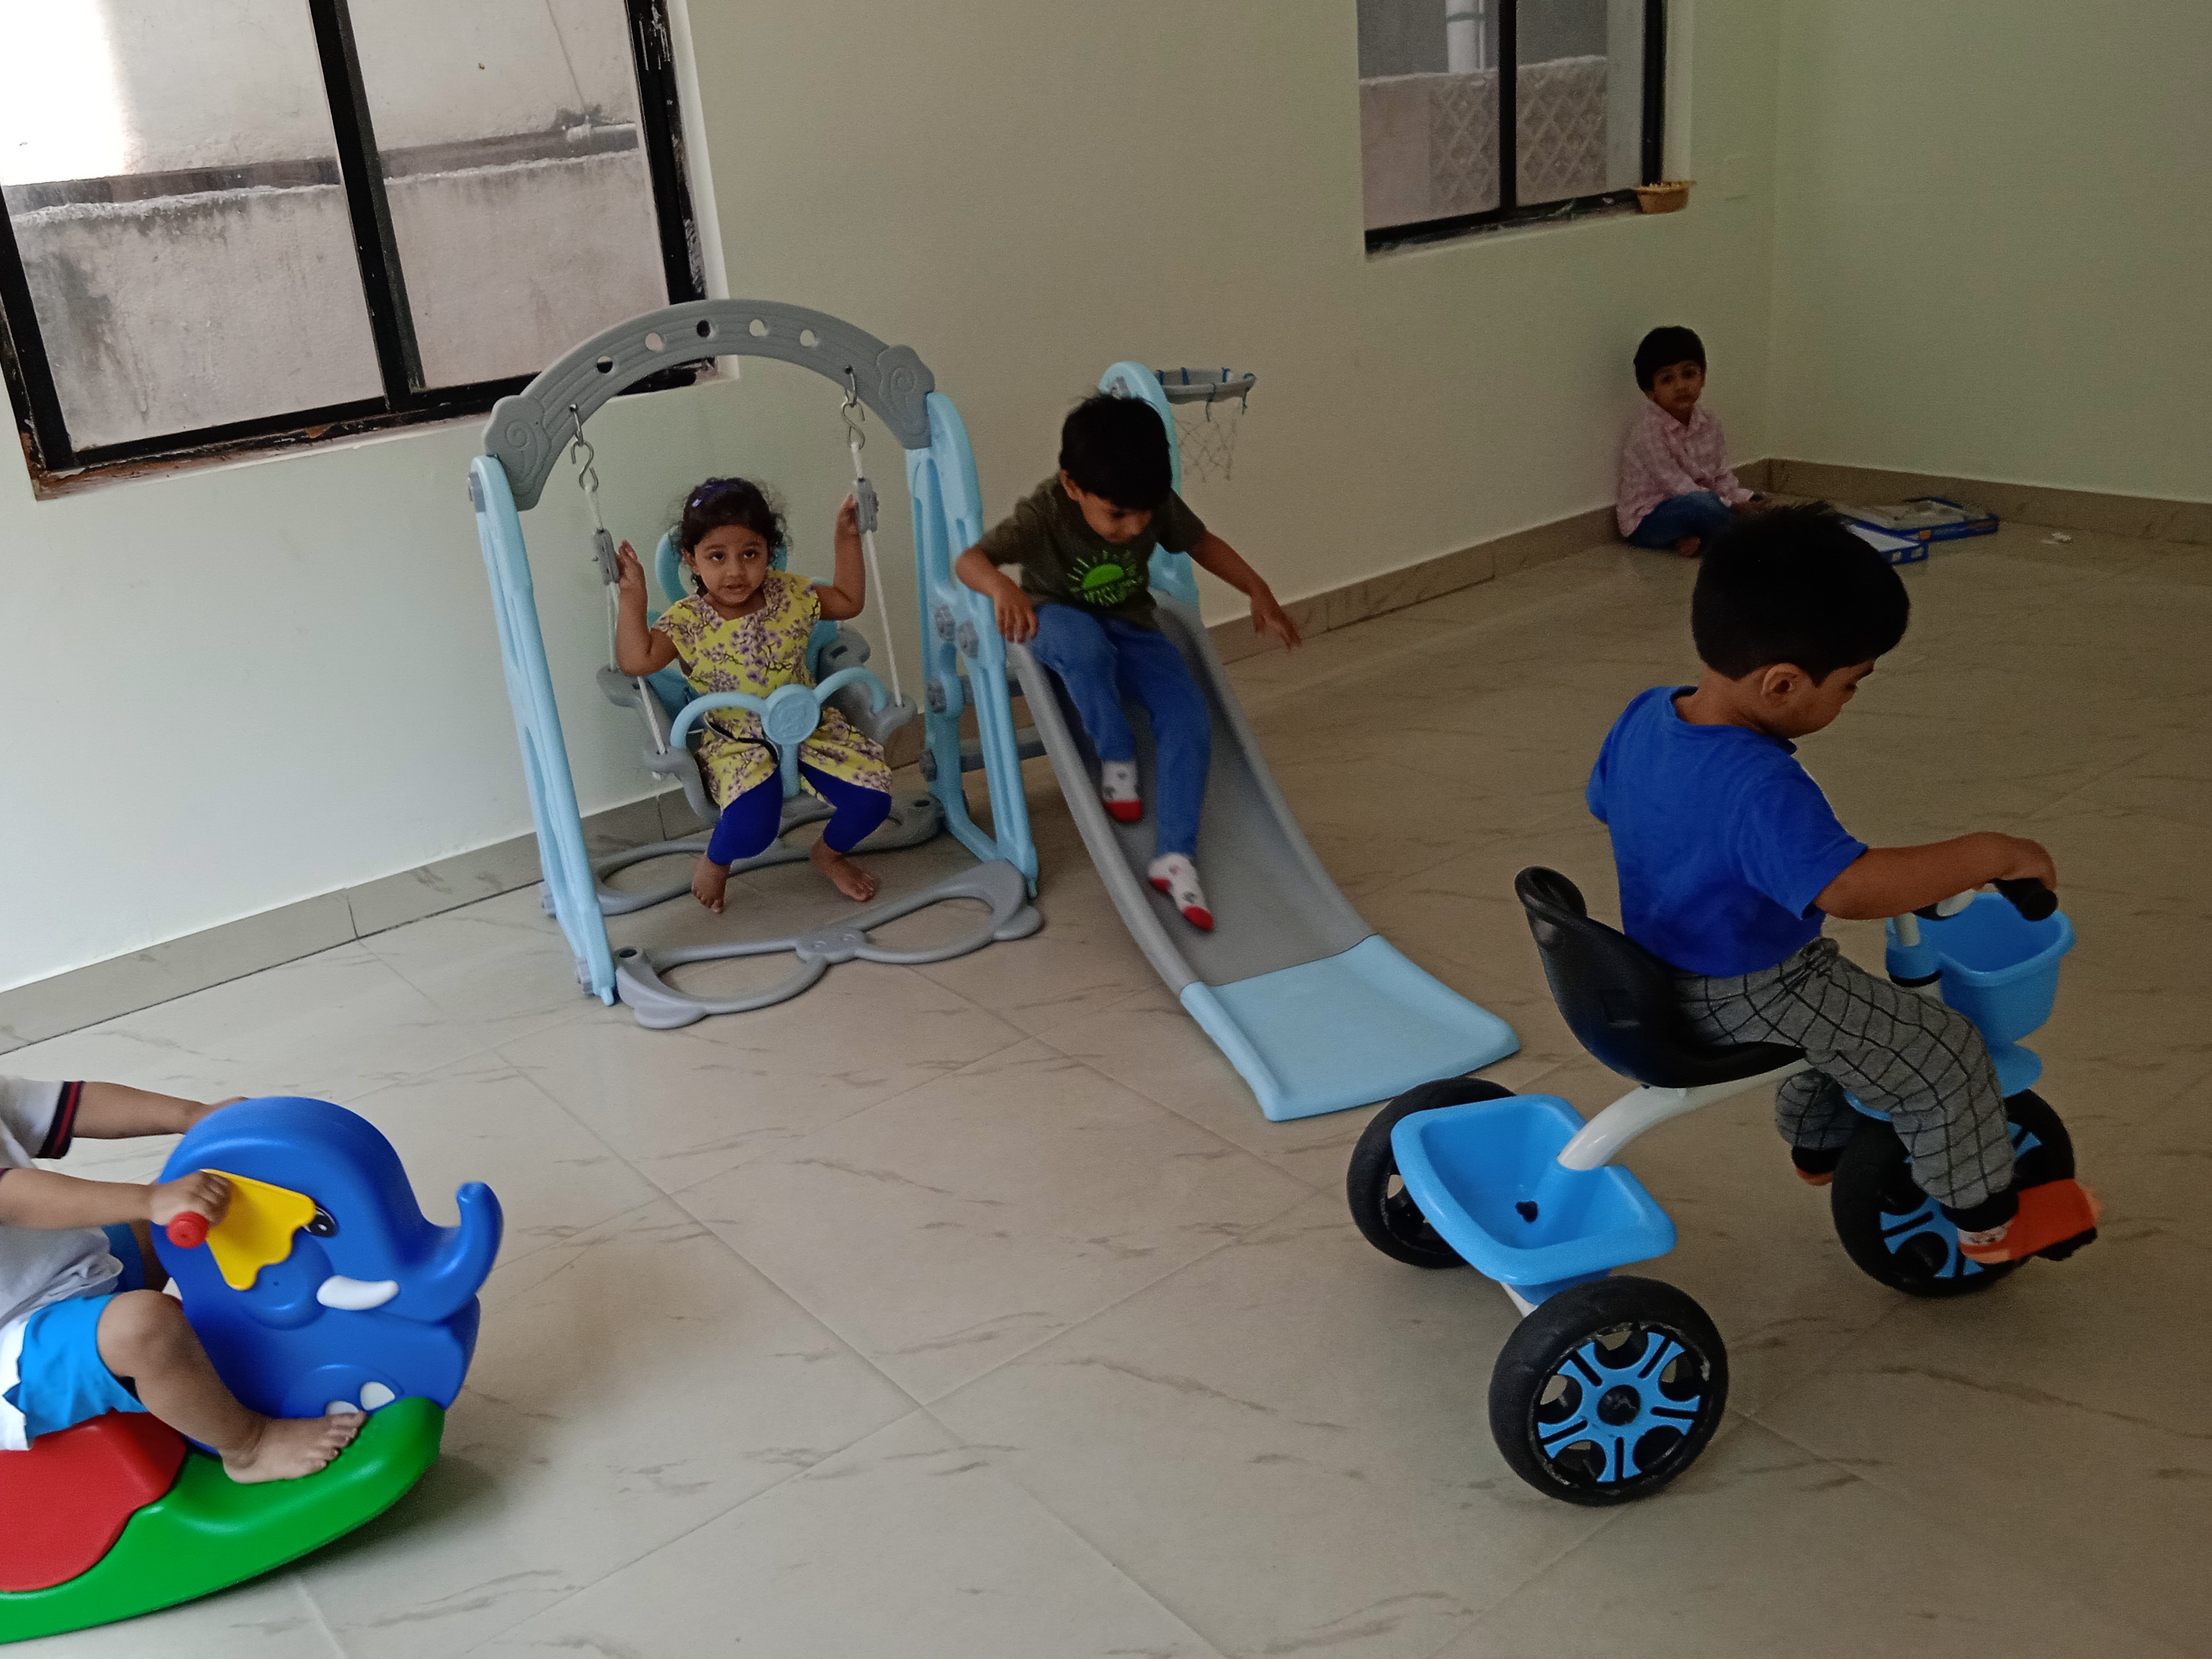 Children playing and doing fun activities